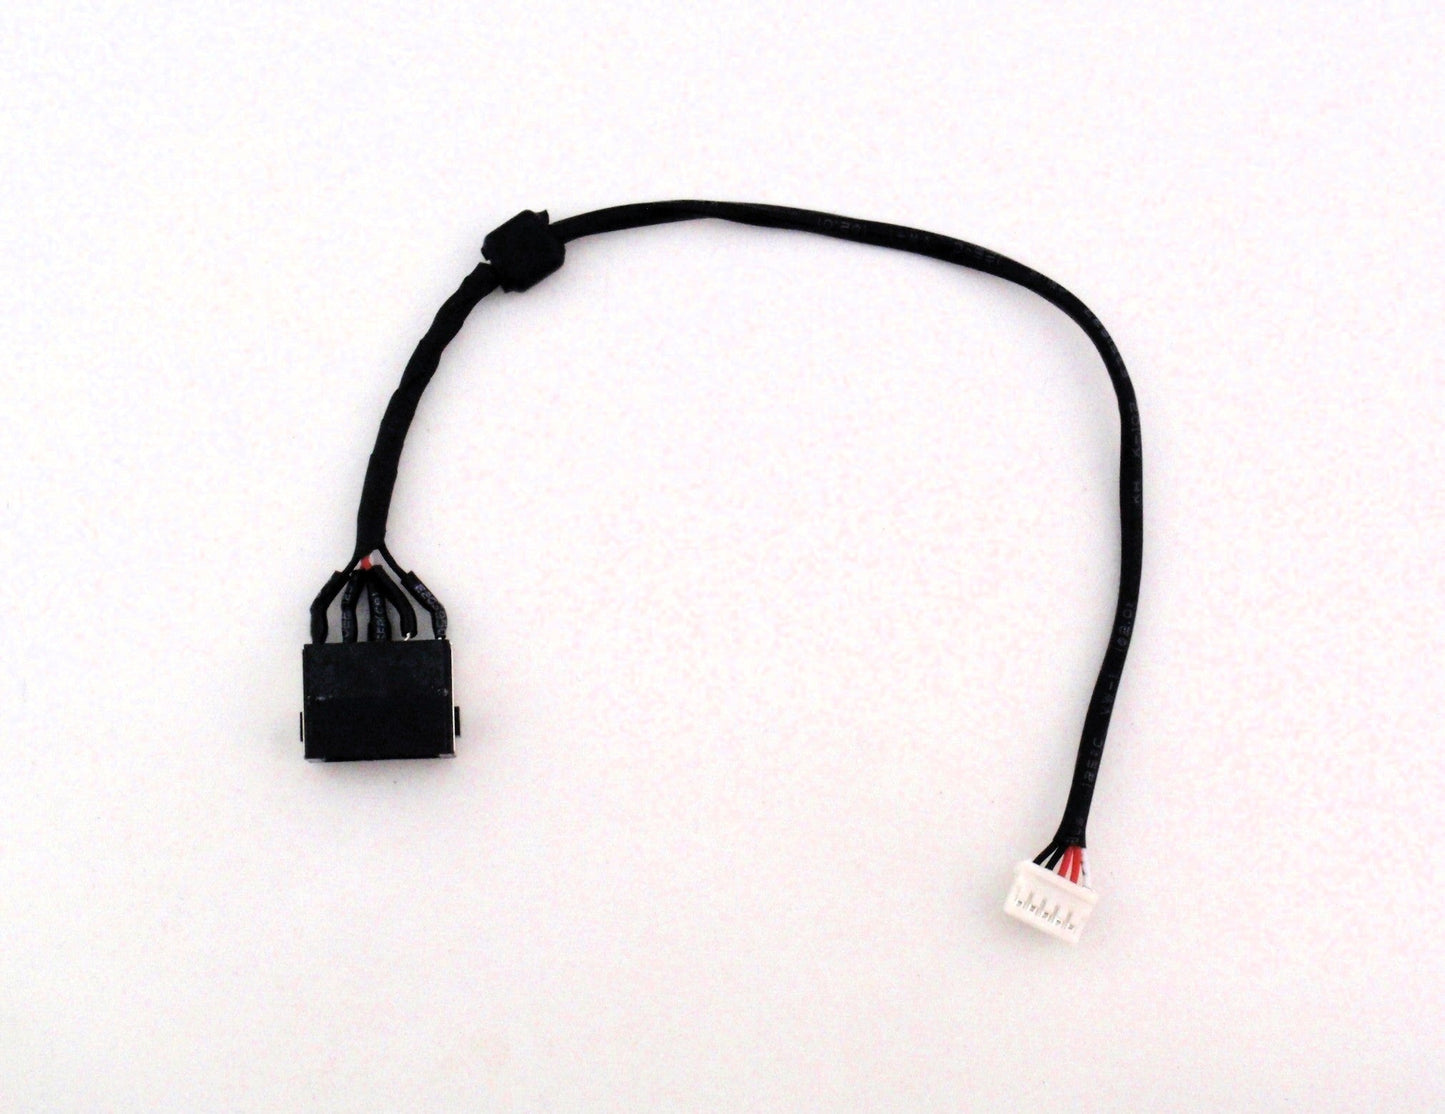 Lenovo New DC In Power Jack Charging Port Connector Cable DC30100P600 ThinkPad L450 20DS 20DT 00HT815